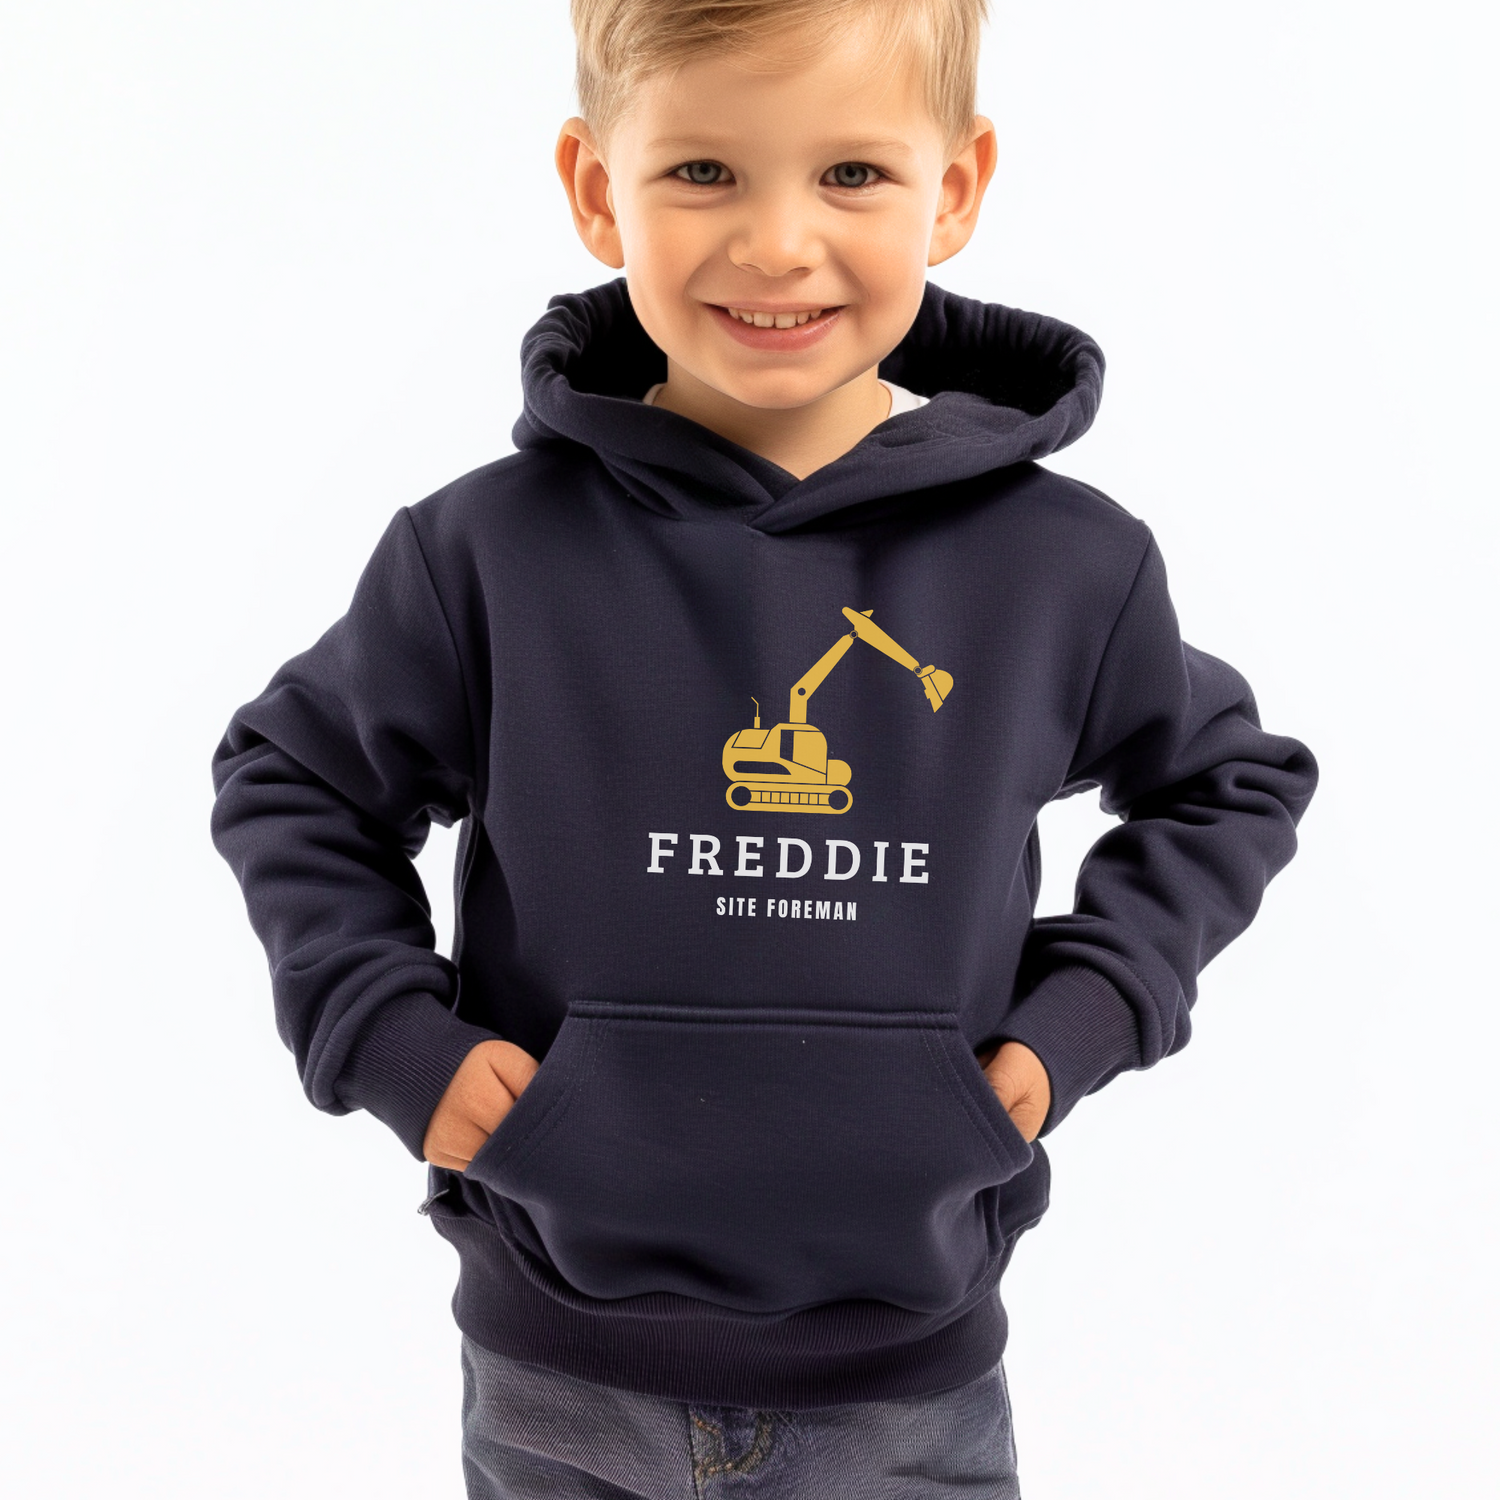 A Little boy wearing a navy blue hoddie with a printed digger design, a personalised name and words saying "site foreman" in white 